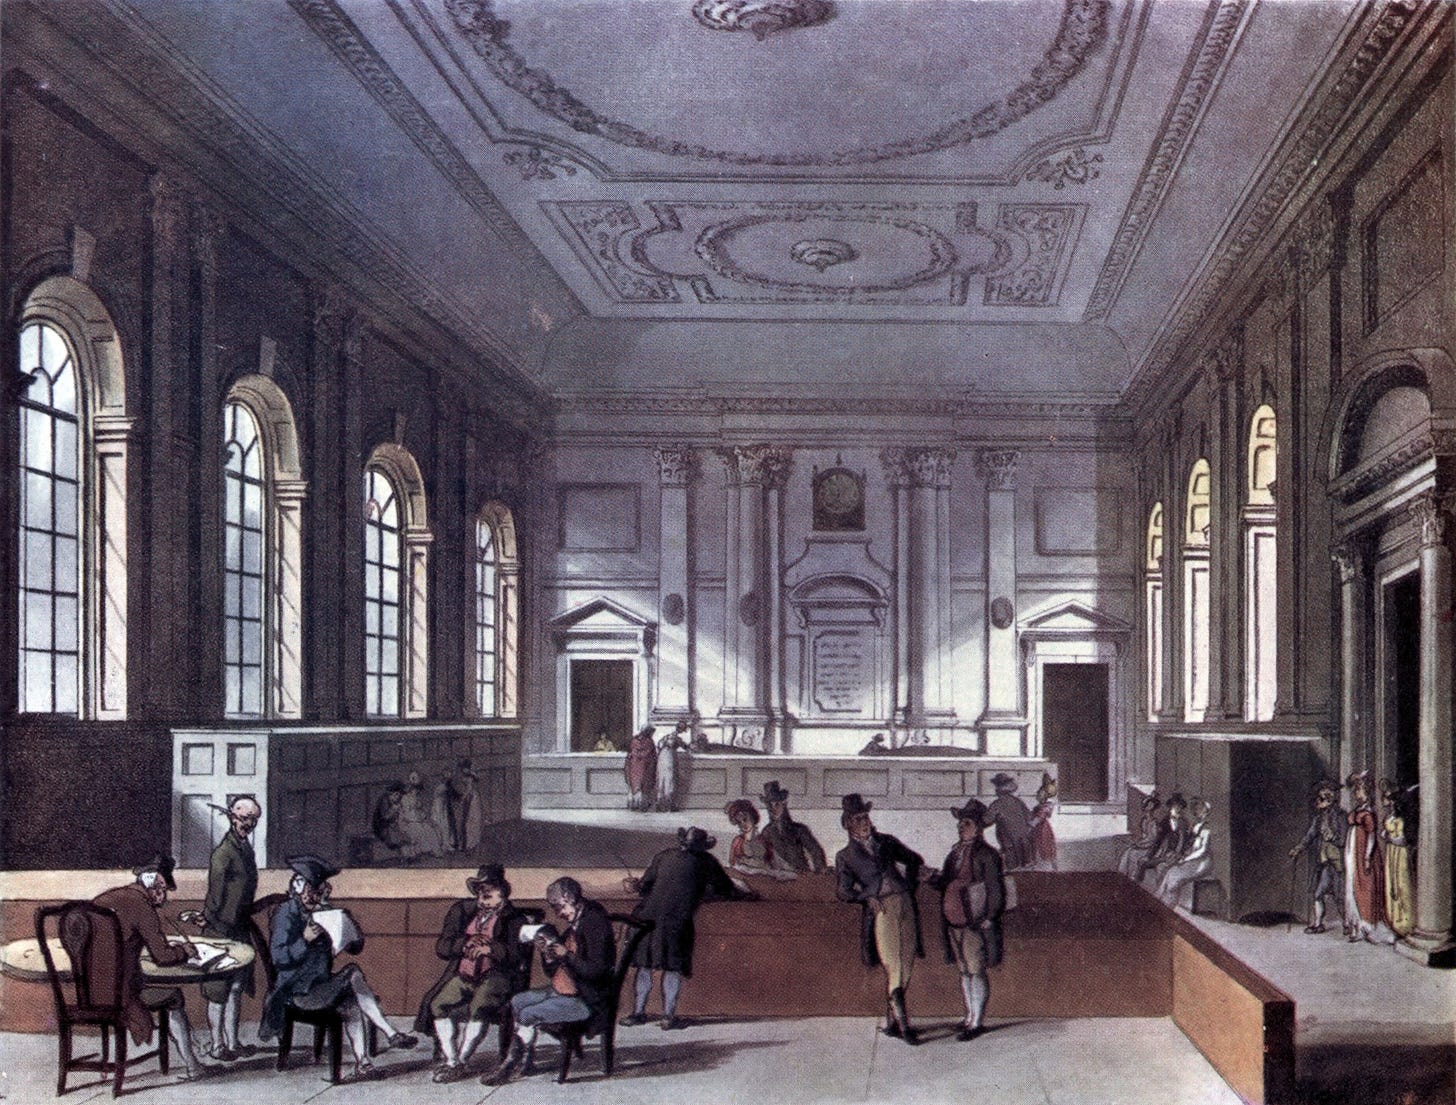 The Dividend Hall of South Sea House, 1810